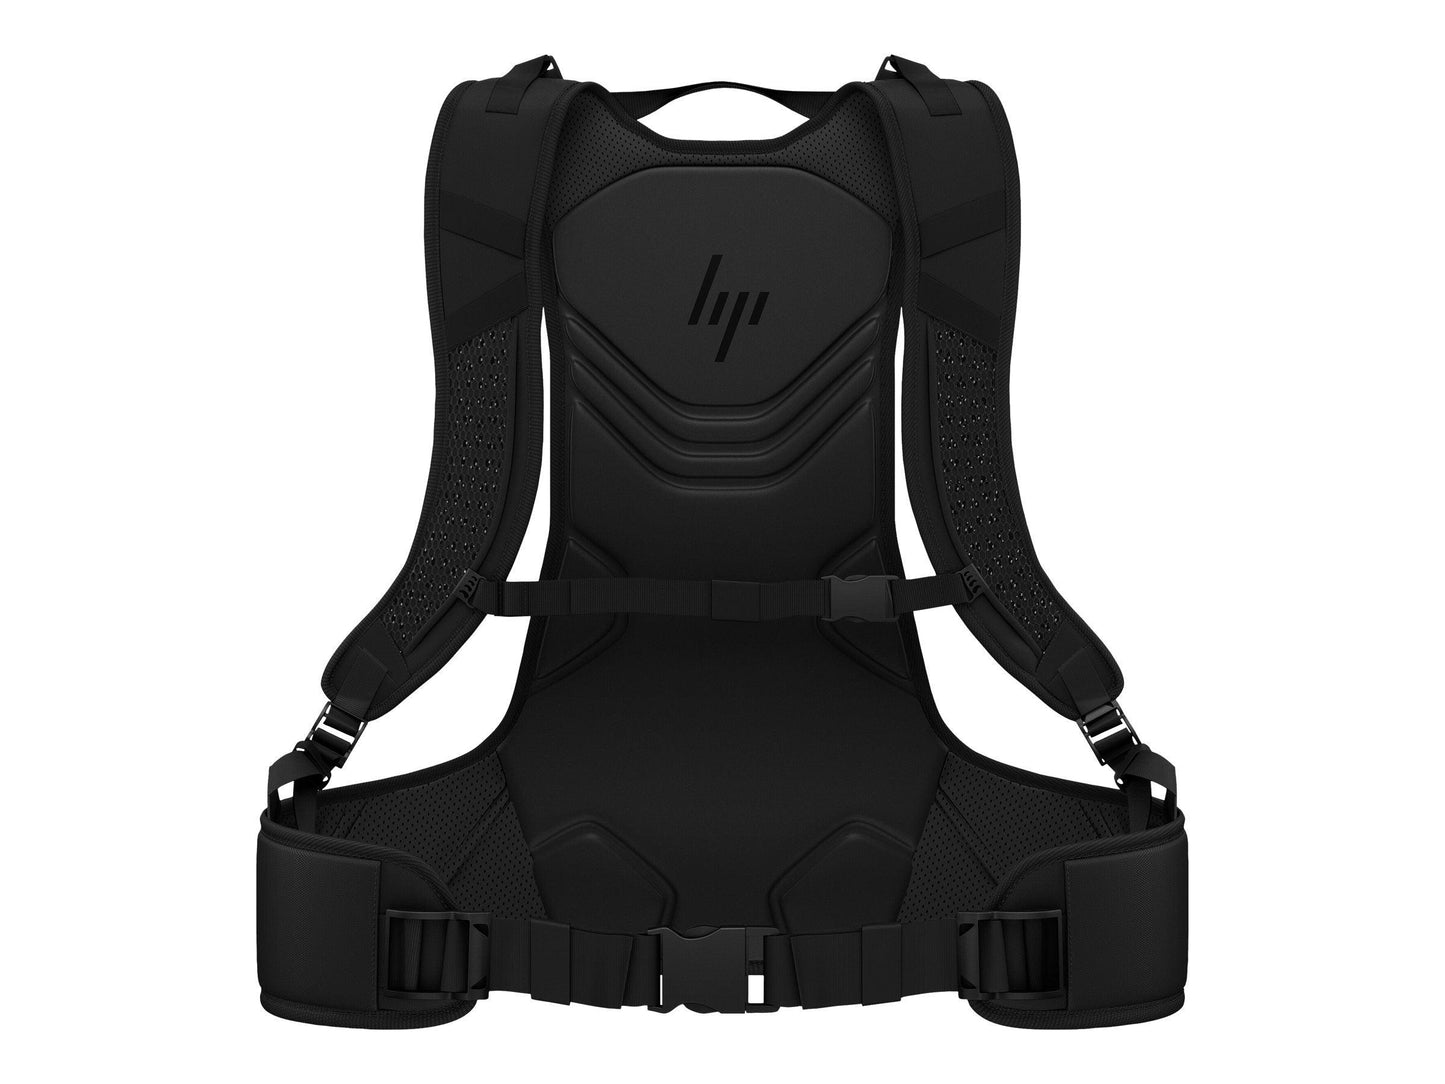 Pack 5x HP VR Backpack G2 Harness + 22x HP Z VR Batteries - Remis à neuf